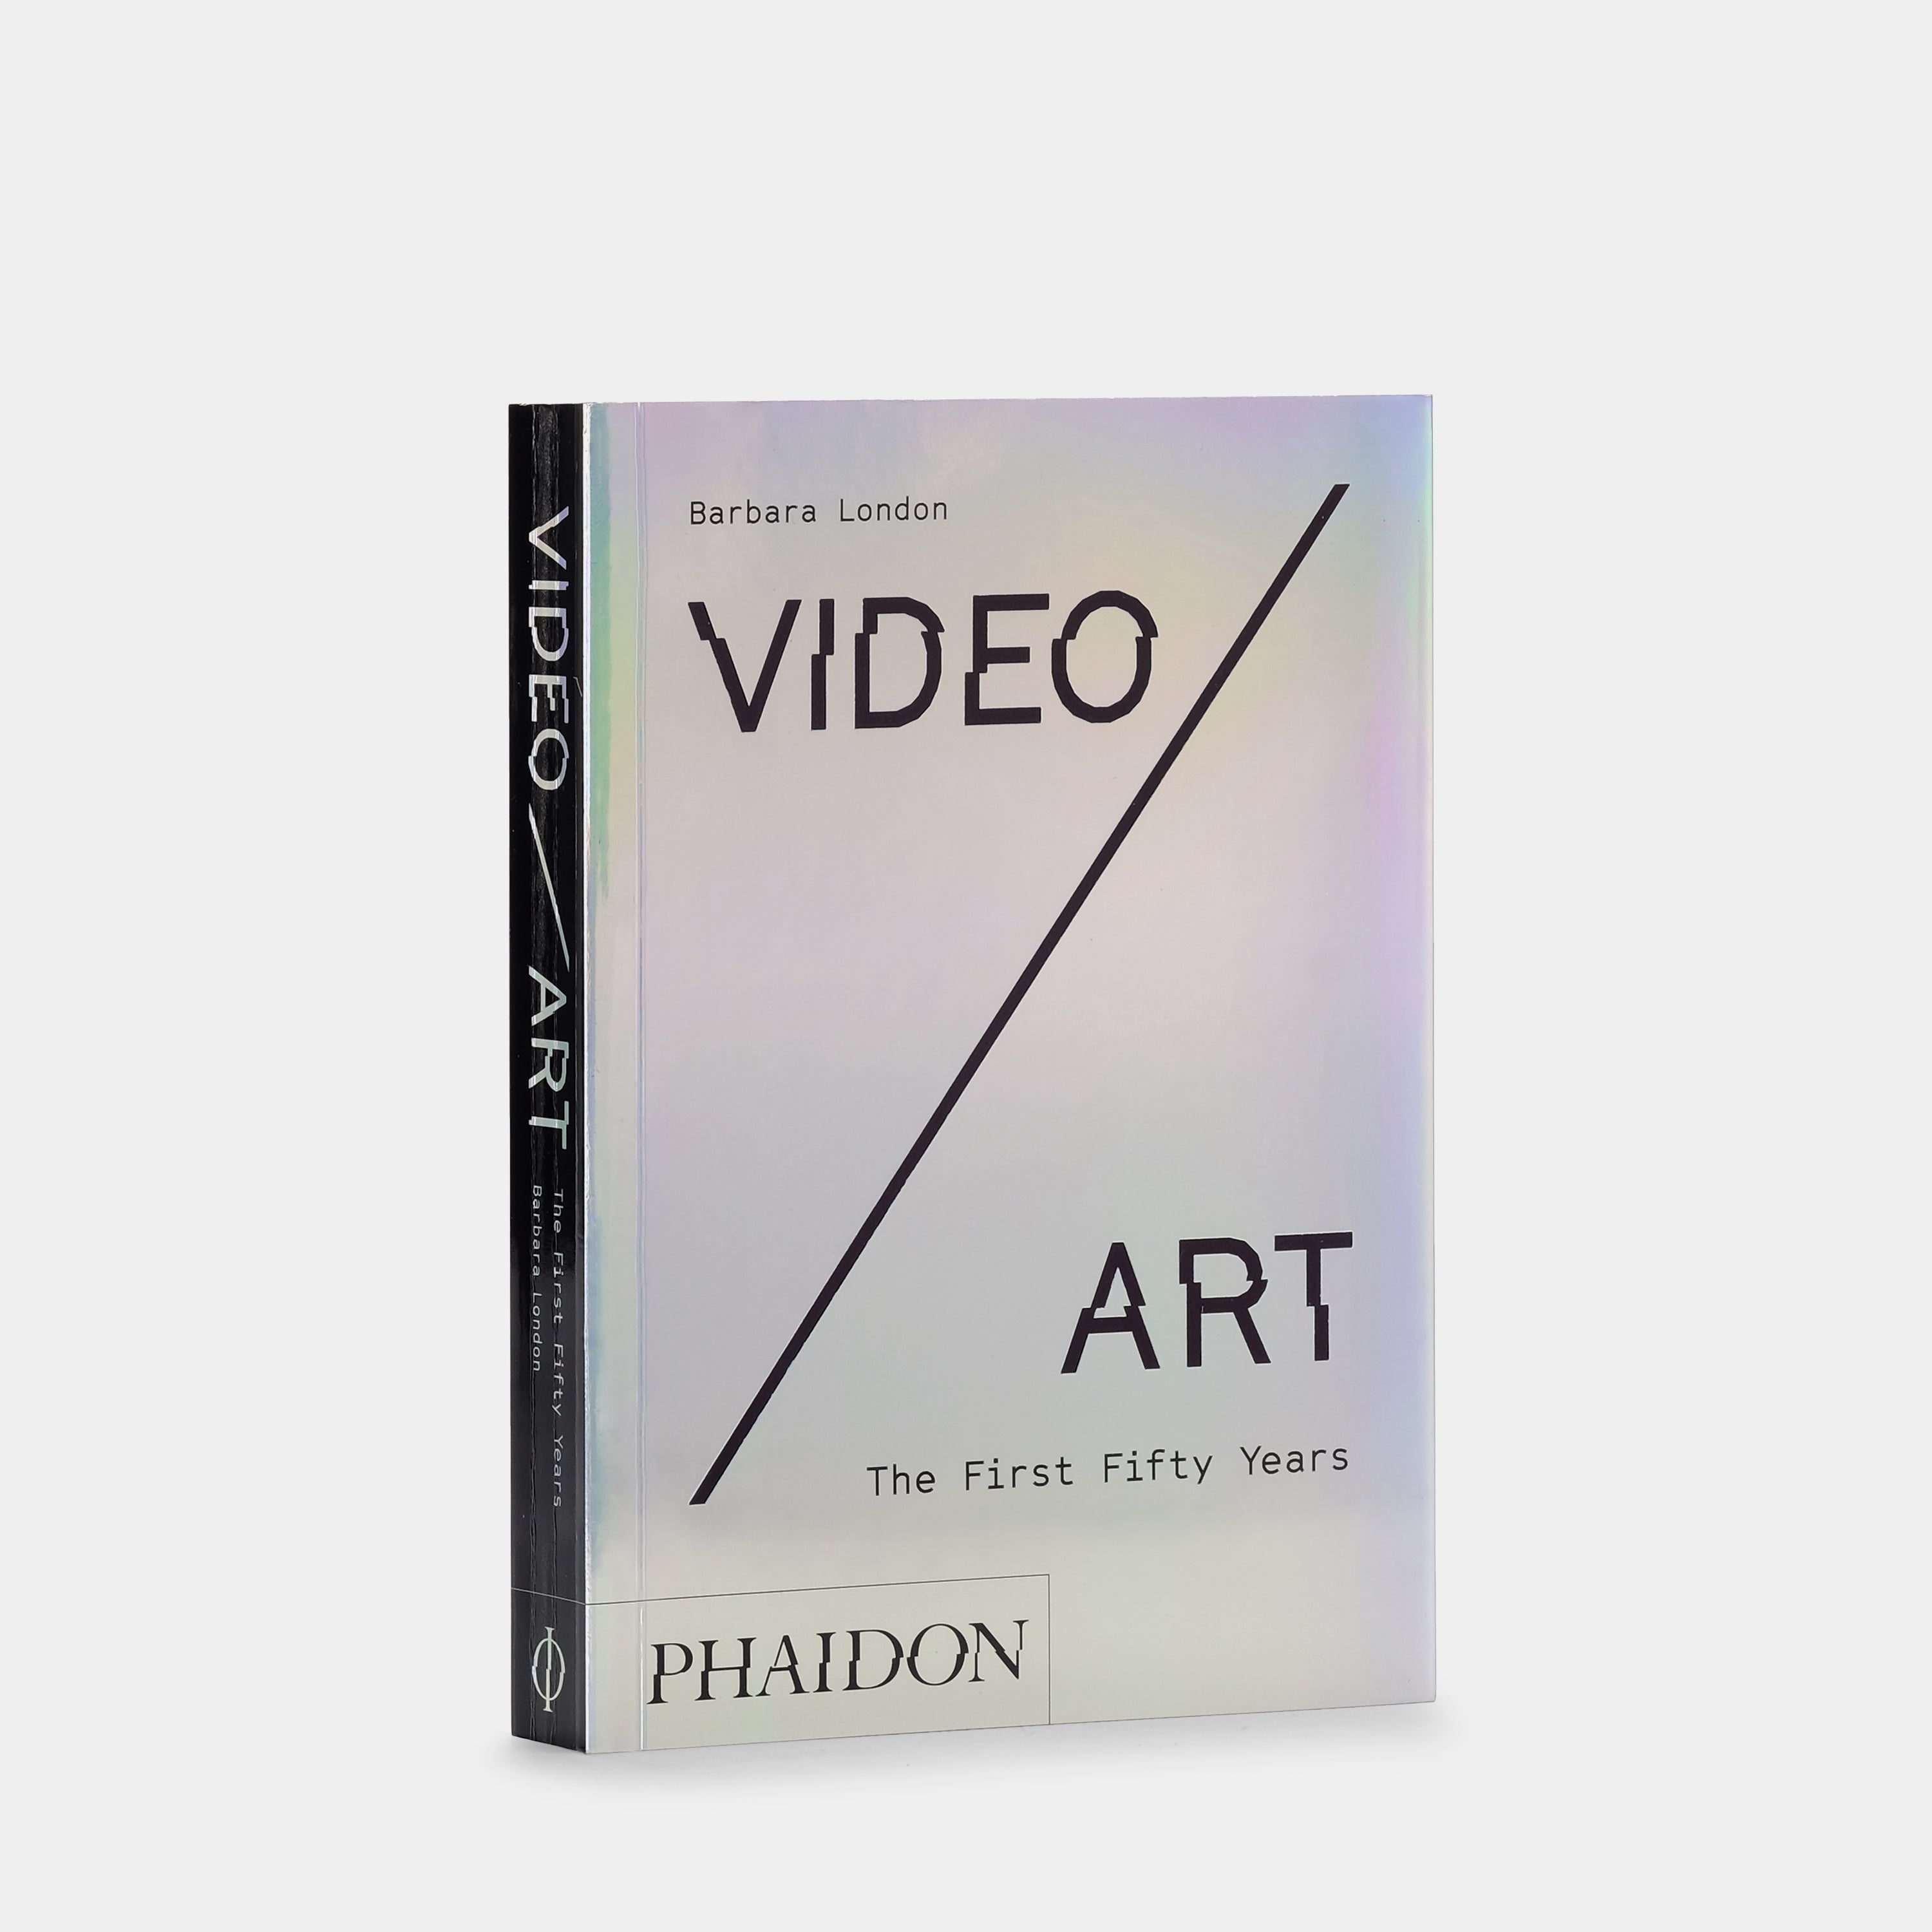 Video/Art: The First Fifty Years by Barbara London Phaidon Book